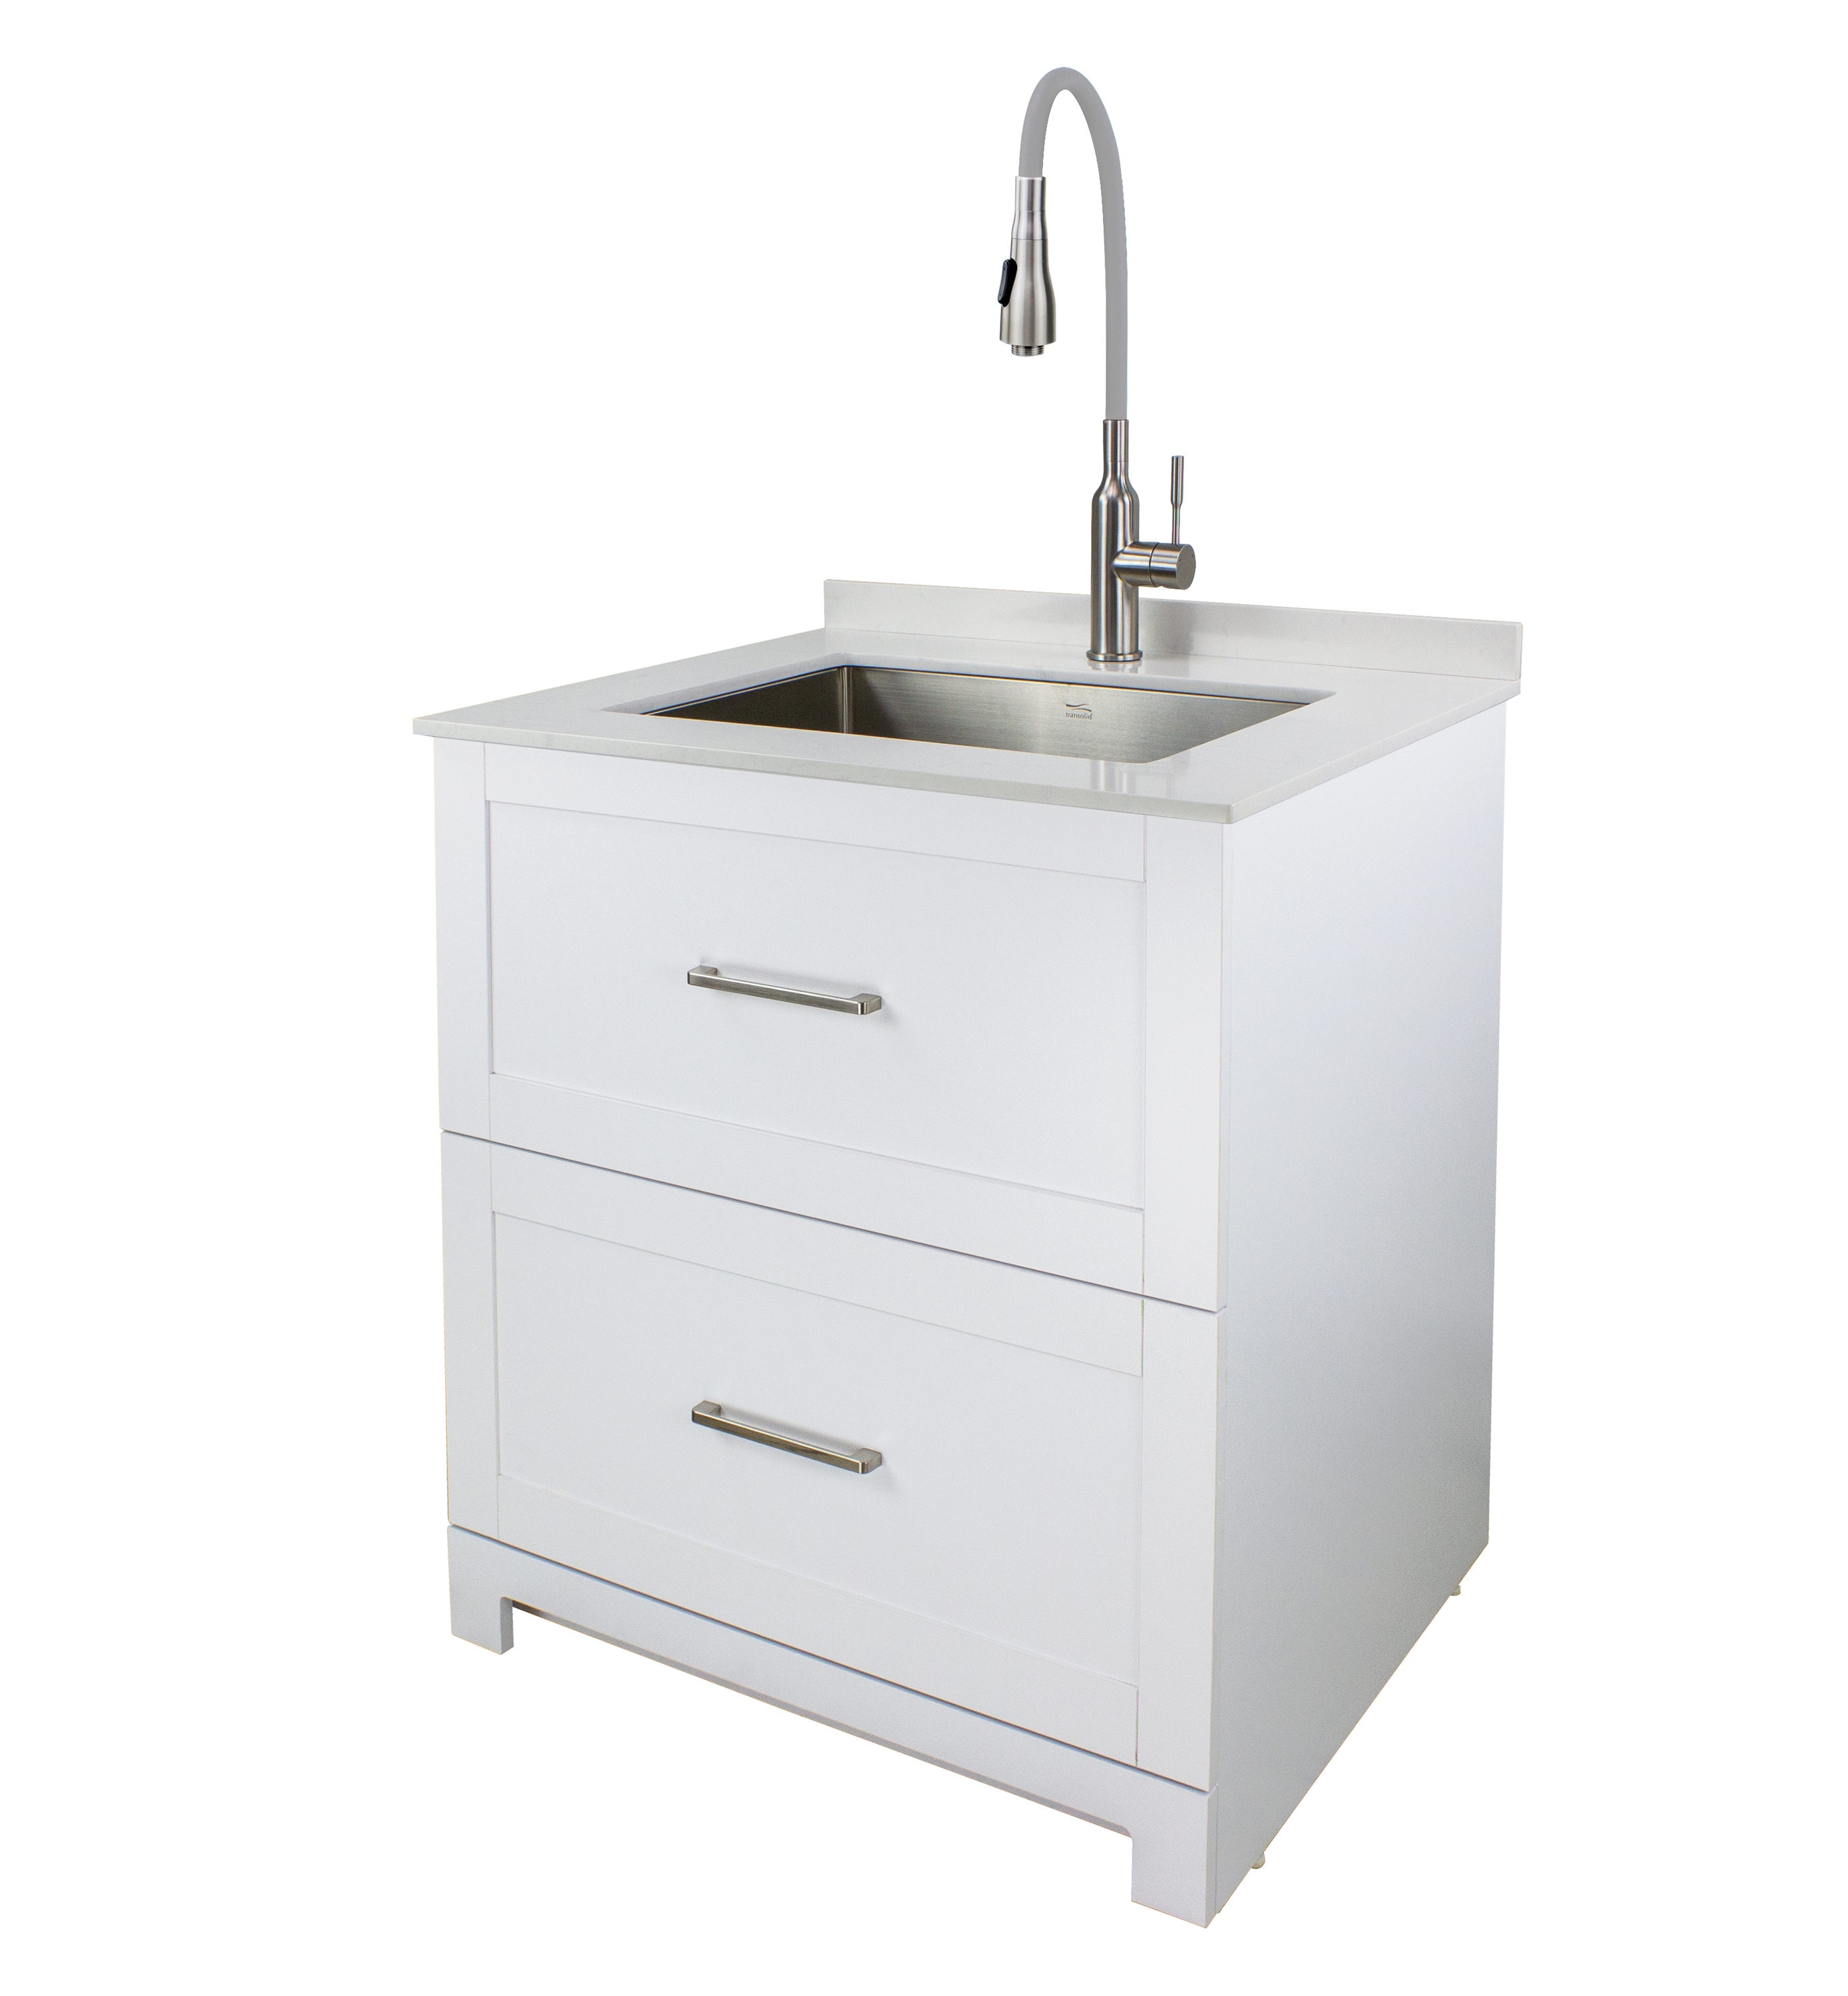 Blue - Utility Sinks & Accessories - Plumbing - The Home Depot